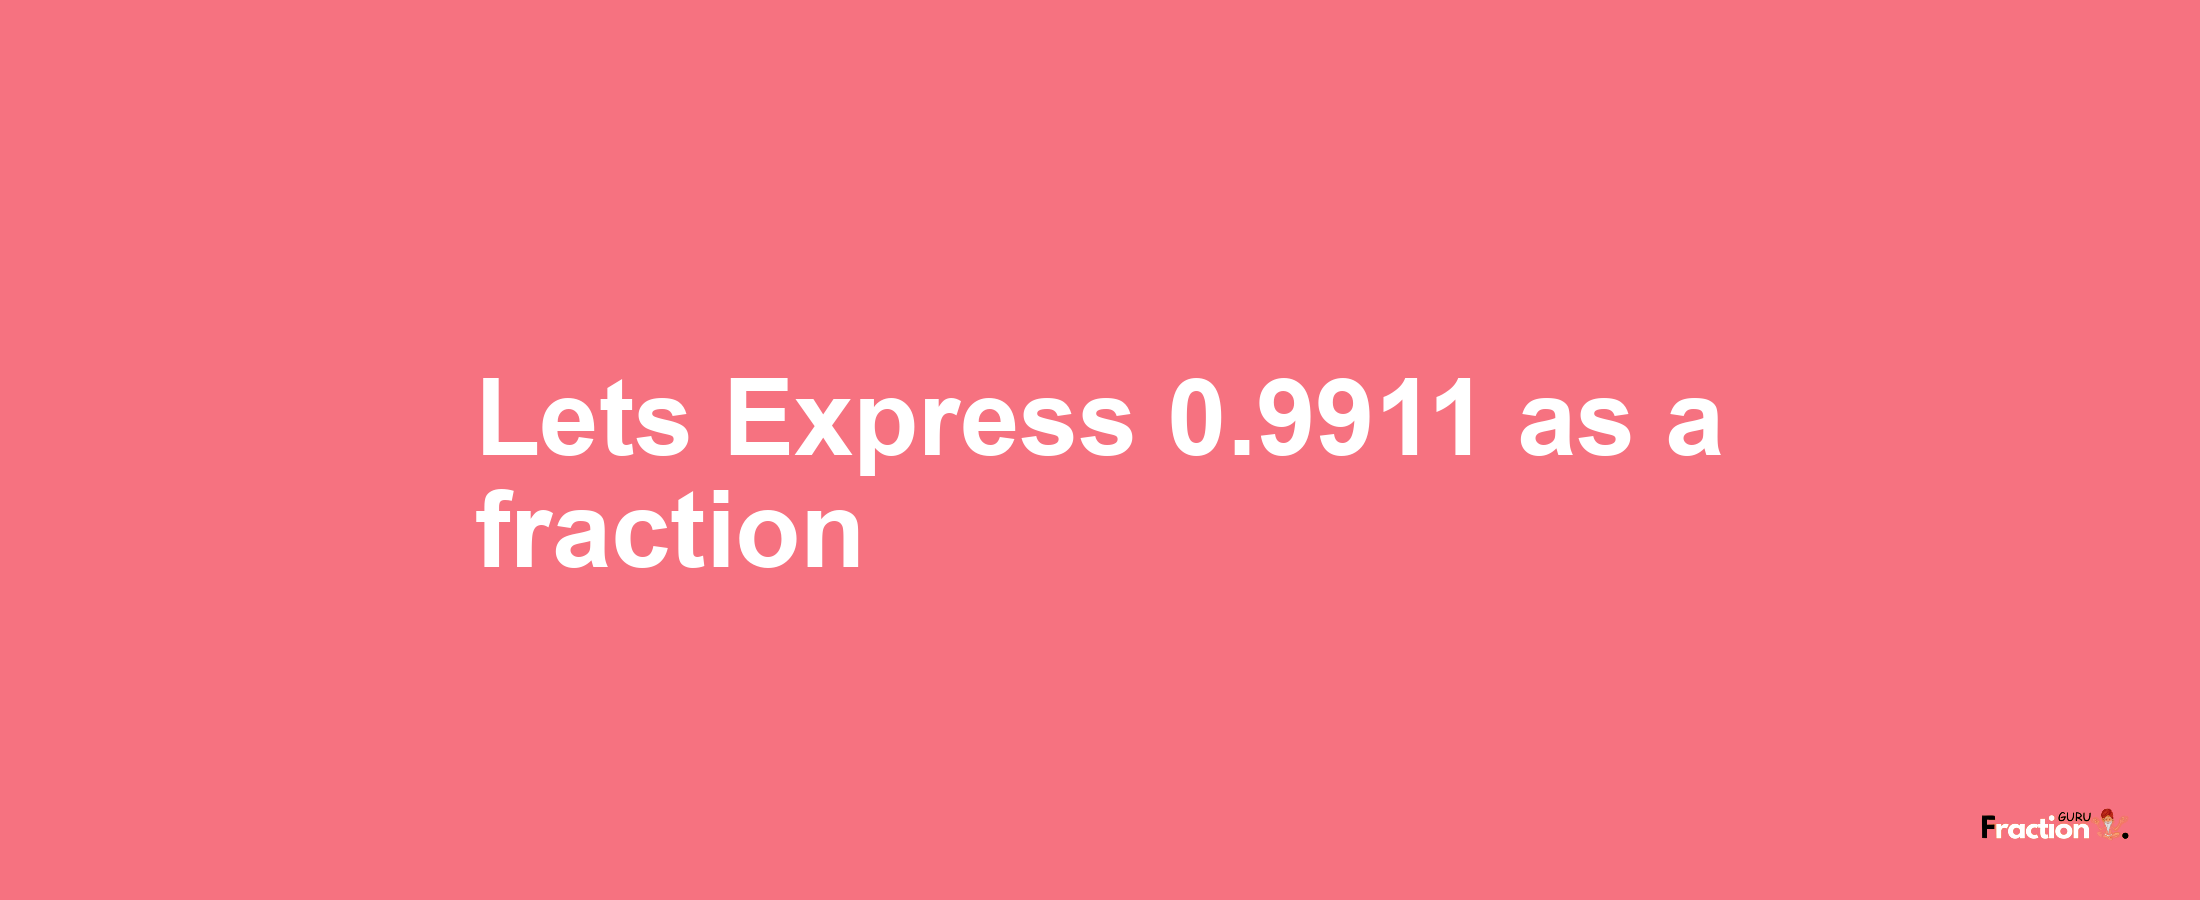 Lets Express 0.9911 as afraction